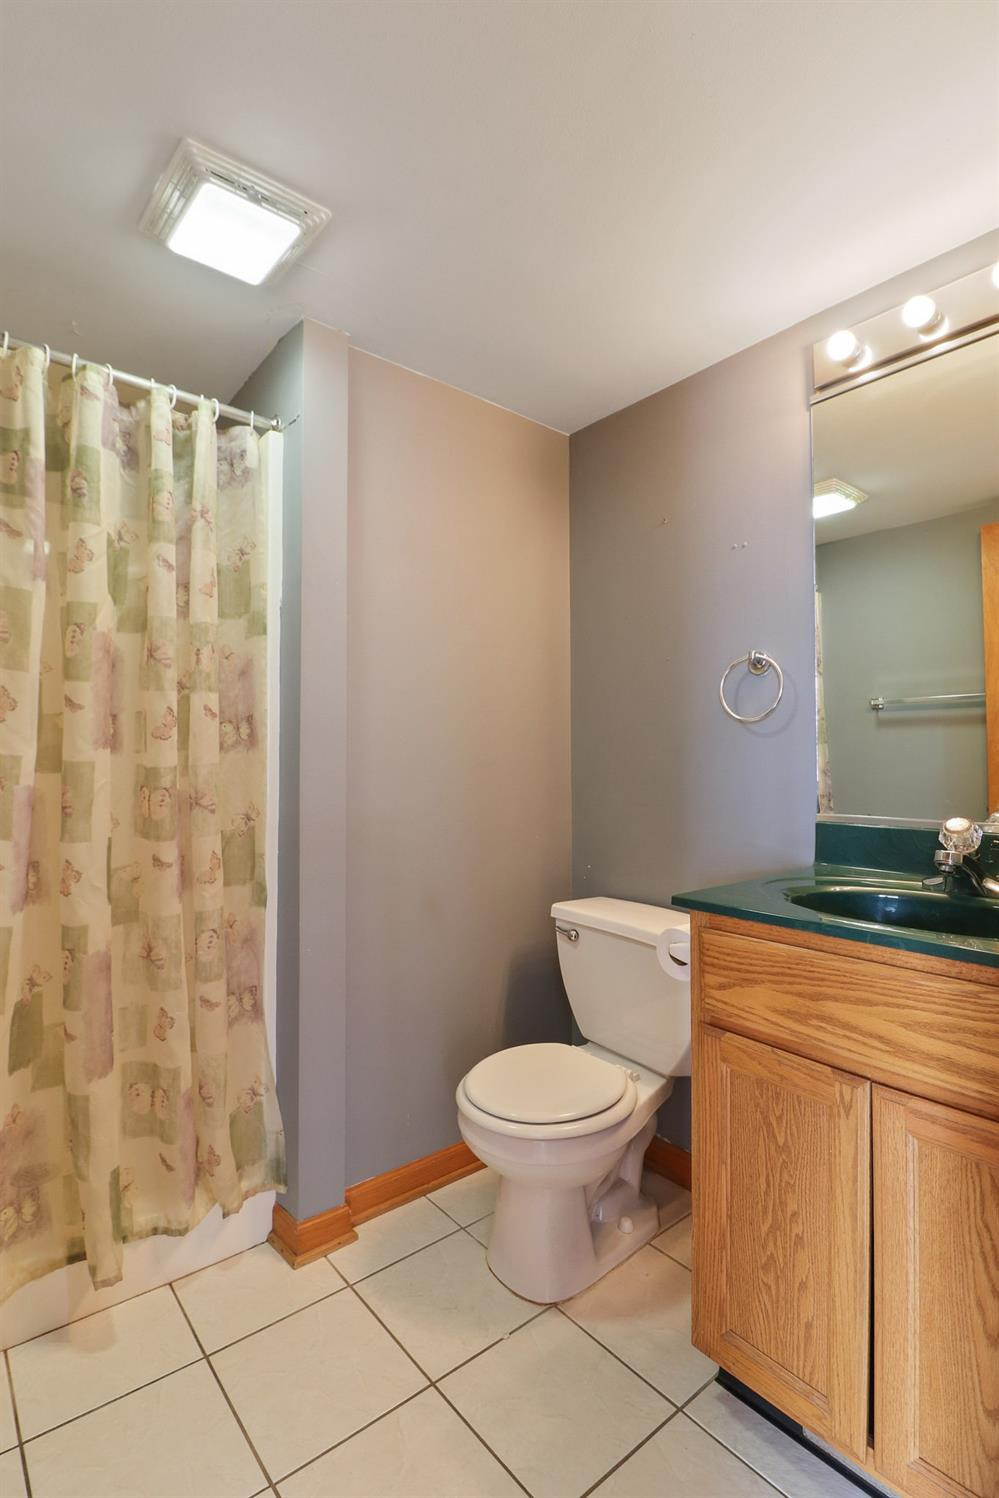 a bathroom with a granite countertop toilet a sink and a mirror